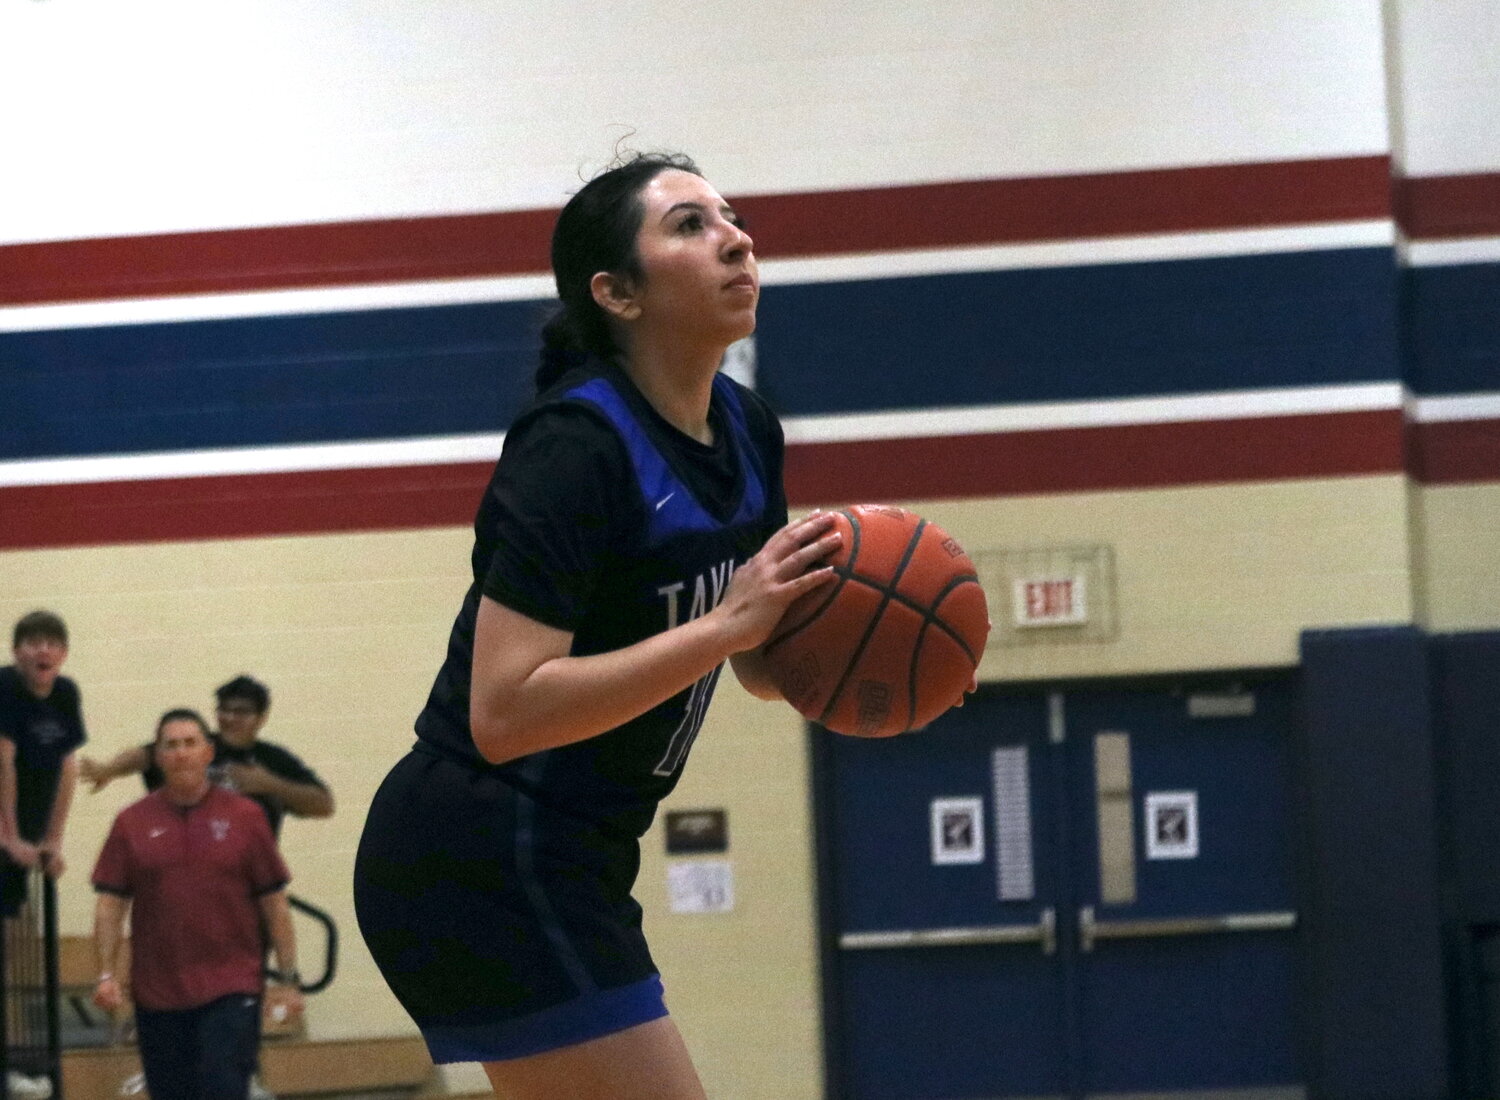 Mia Lopez shoots a 3-pointer during Friday's game between Taylor and Tompkins at the Tompkins gym.